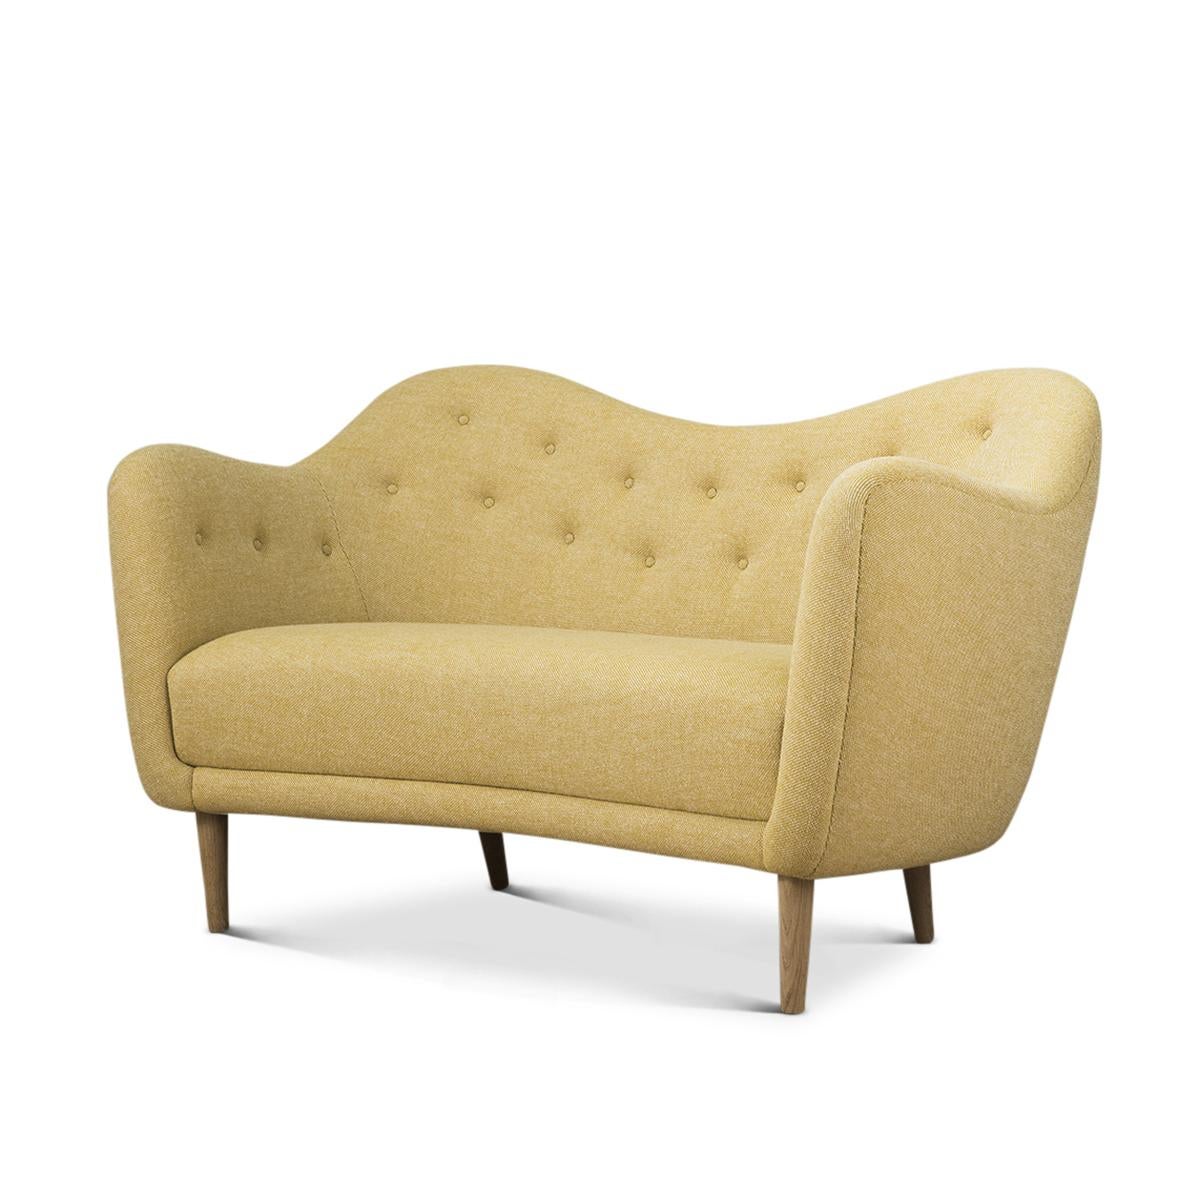 Contemporary Finn Juhl 46 Sofa Couch Wood and Fabric